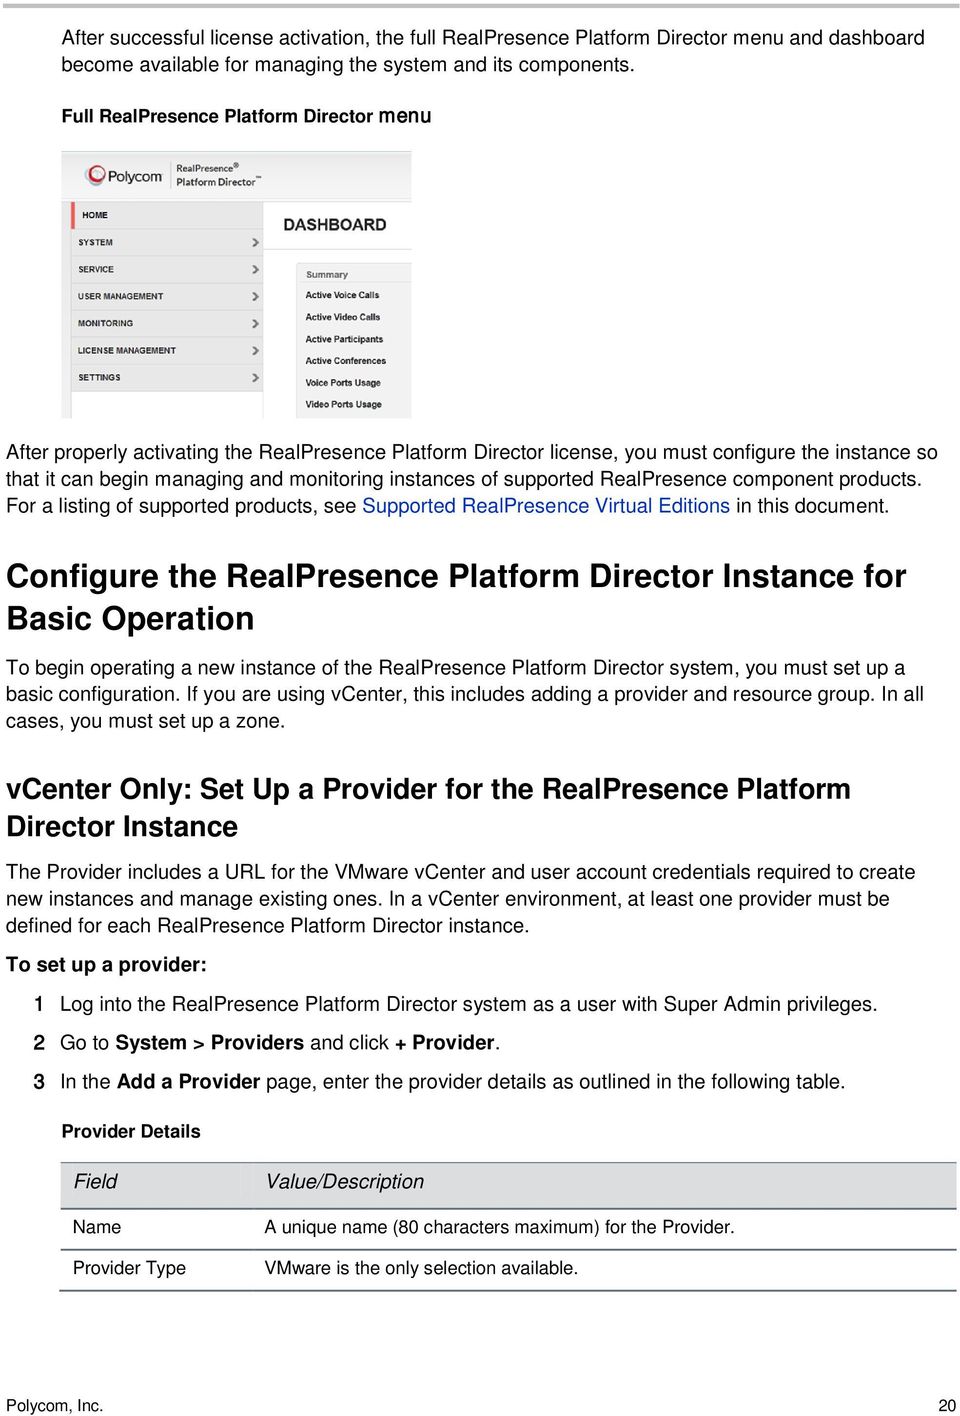 of supported RealPresence component products. For a listing of supported products, see Supported RealPresence Virtual Editions in this document.